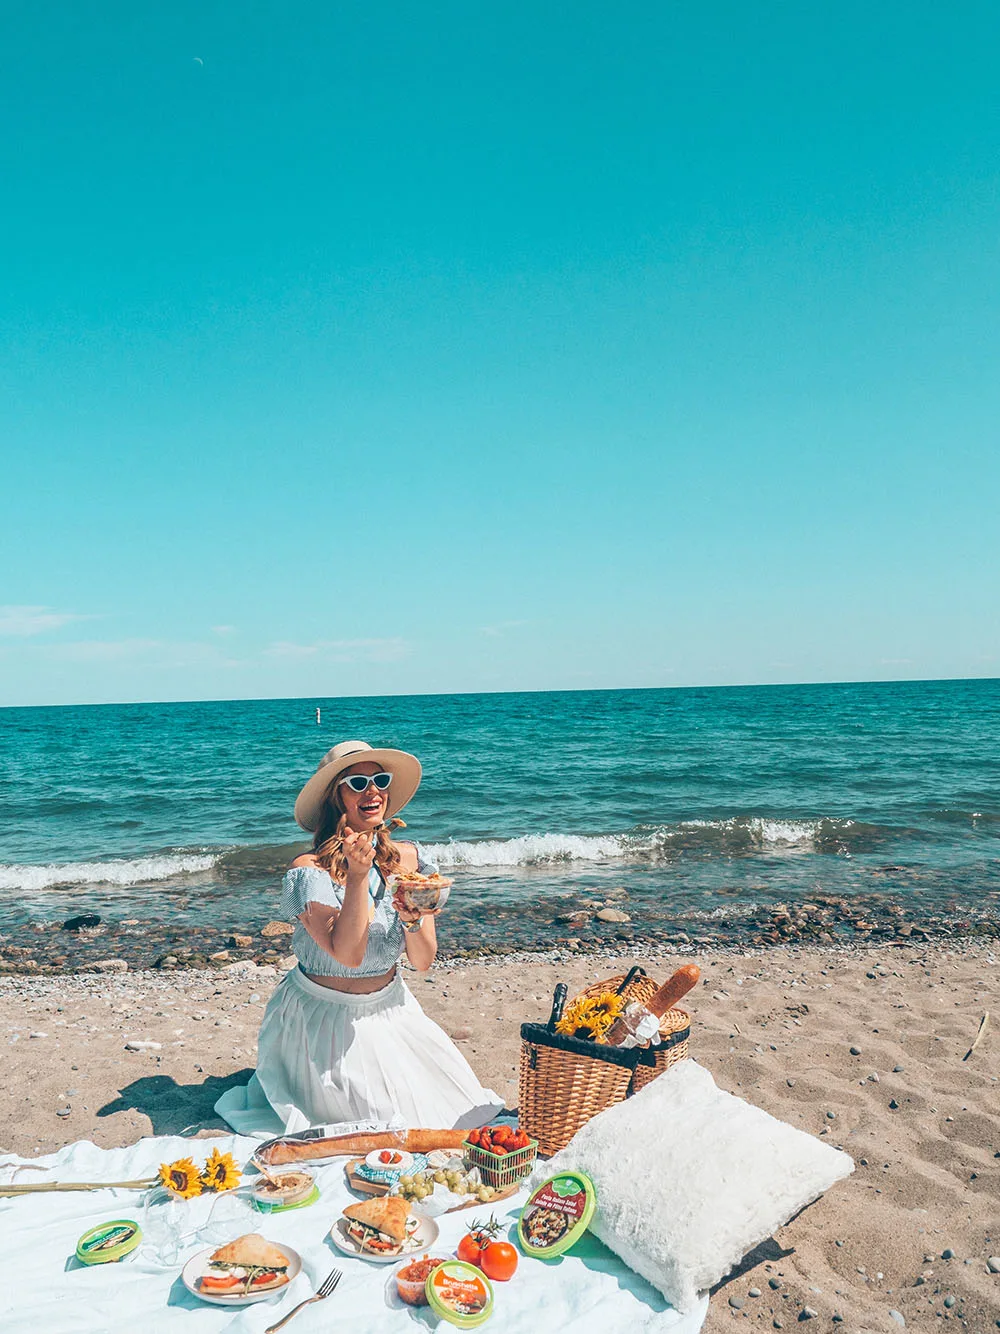 If you're planning on visiting Toronto soon and hoping to get some great photos while you're there, you definitely don't want to miss this guide on the most instagrammable places in Toronto, outdoor edition! This guide features all sorts of incredible outdoor photography locations in Toronto and the GTA. Pictured here: Woodbine Beach